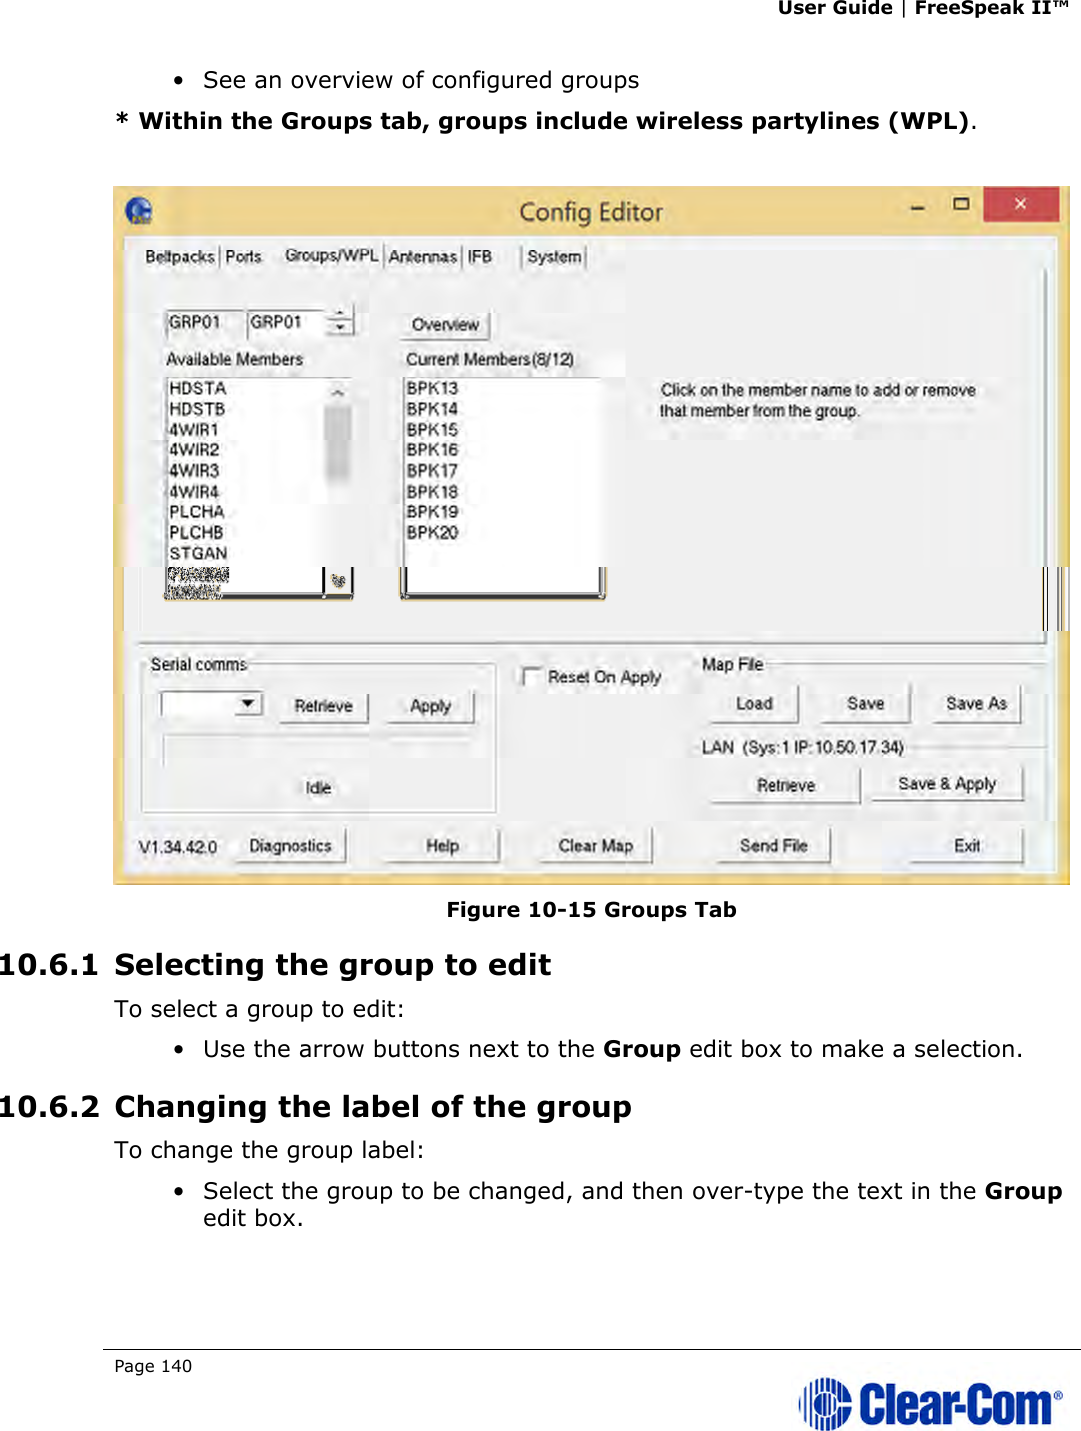 User Guide | FreeSpeak II™  Page 140   • See an overview of configured groups * Within the Groups tab, groups include wireless partylines (WPL).   Figure 10-15 Groups Tab 10.6.1 Selecting the group to edit To select a group to edit: • Use the arrow buttons next to the Group edit box to make a selection. 10.6.2 Changing the label of the group To change the group label: • Select the group to be changed, and then over-type the text in the Group edit box. 